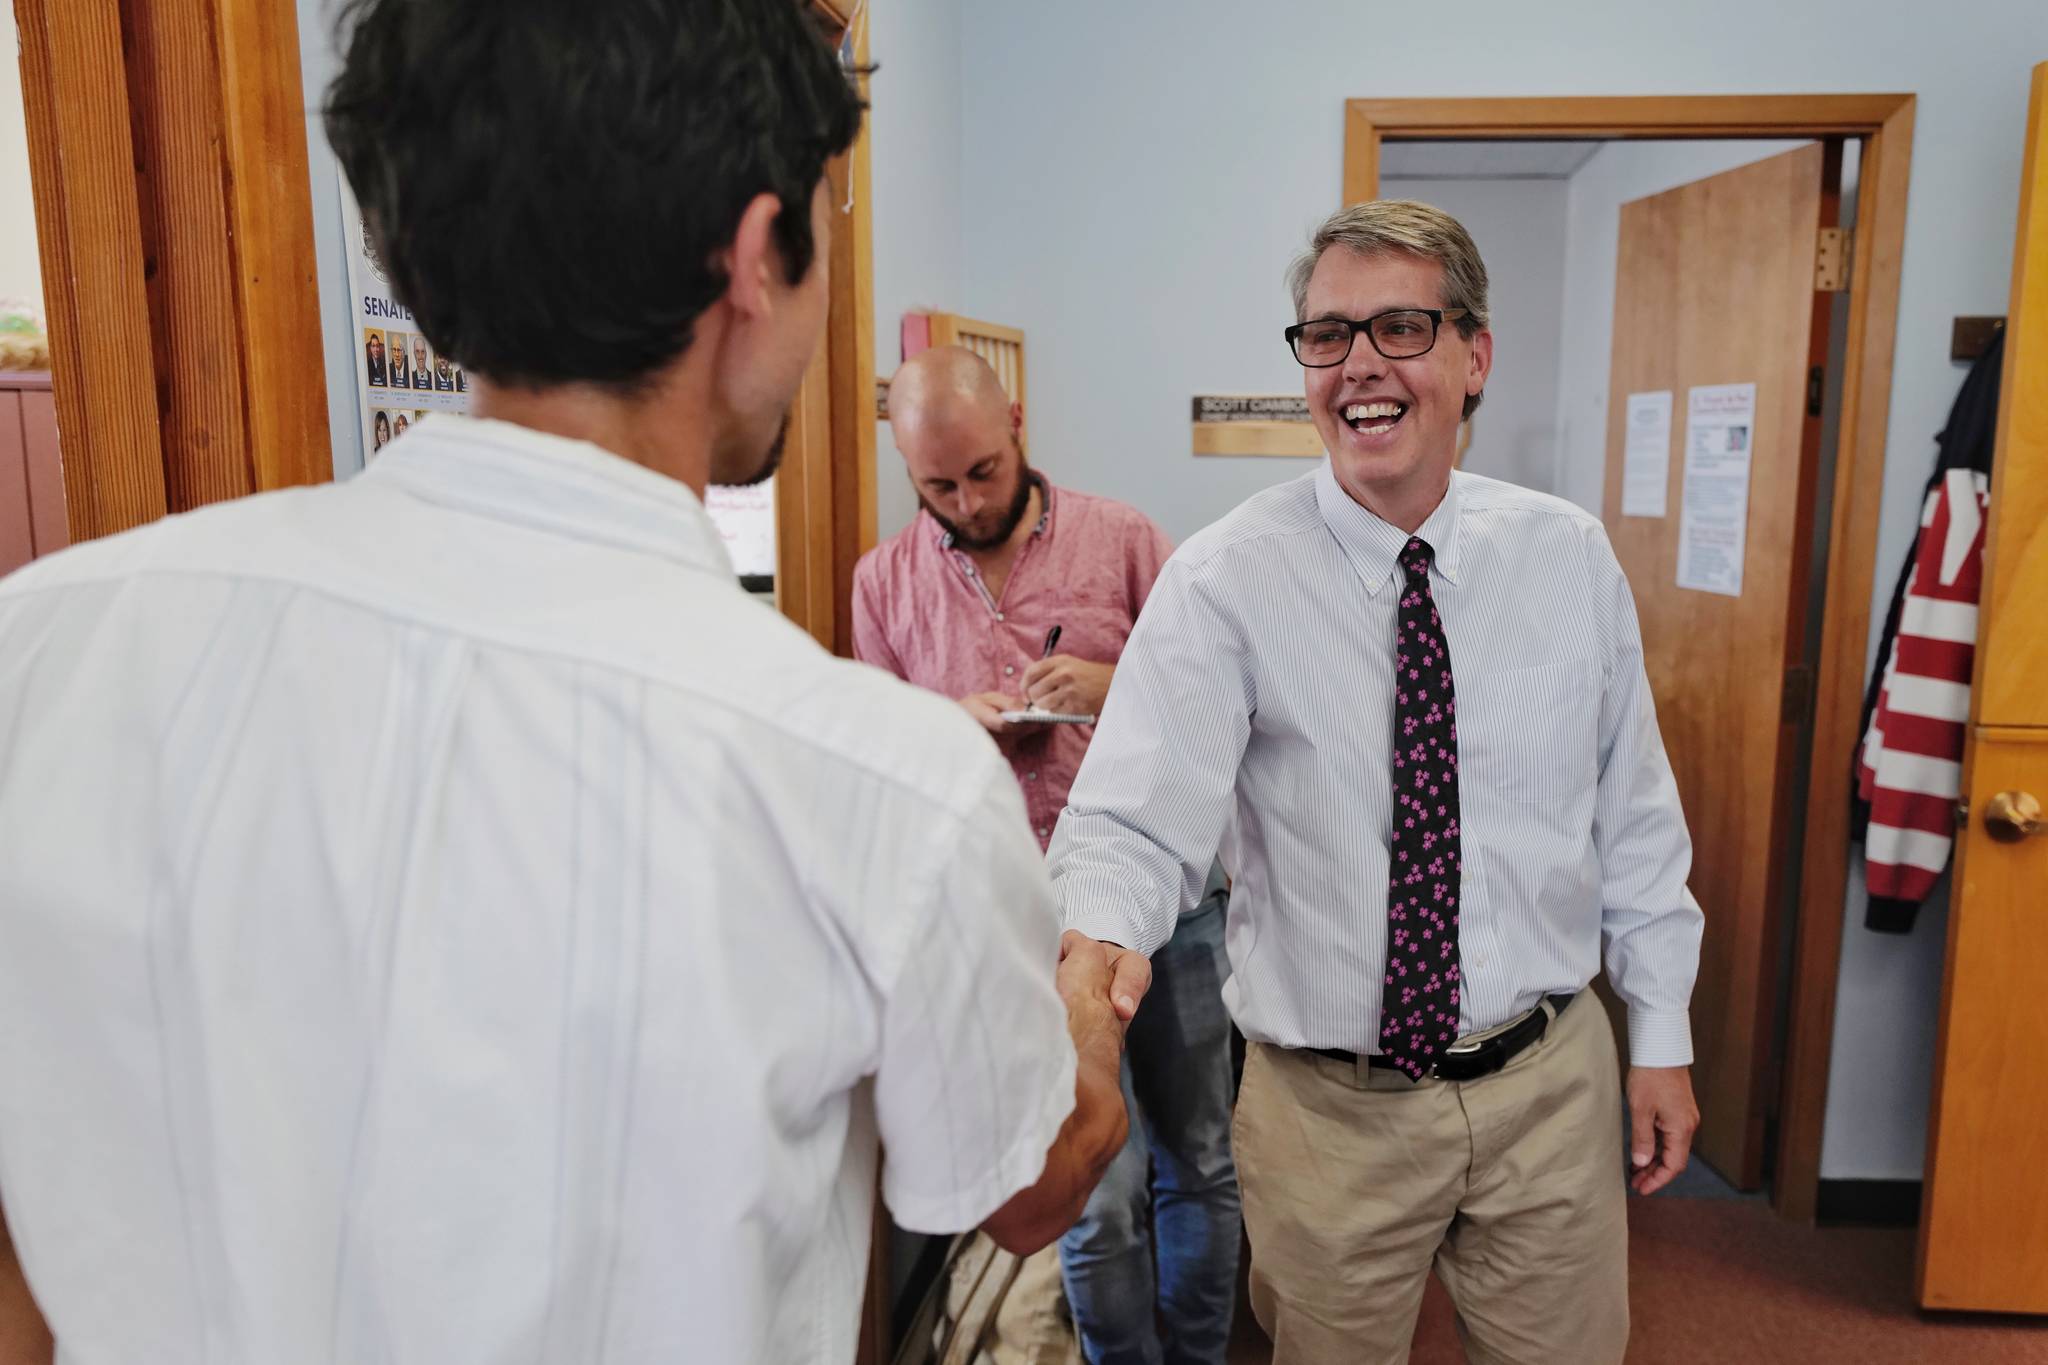 Juneau City Manager Rorie Watt, right, greets Greg Smith after Smith applied to run for one of two Assembly District 1 seats in this falls municipal election on Monday, Aug. 12, 2019. Watt said, “Welcome to the fray.” (Michael Penn | Juneau Empire)